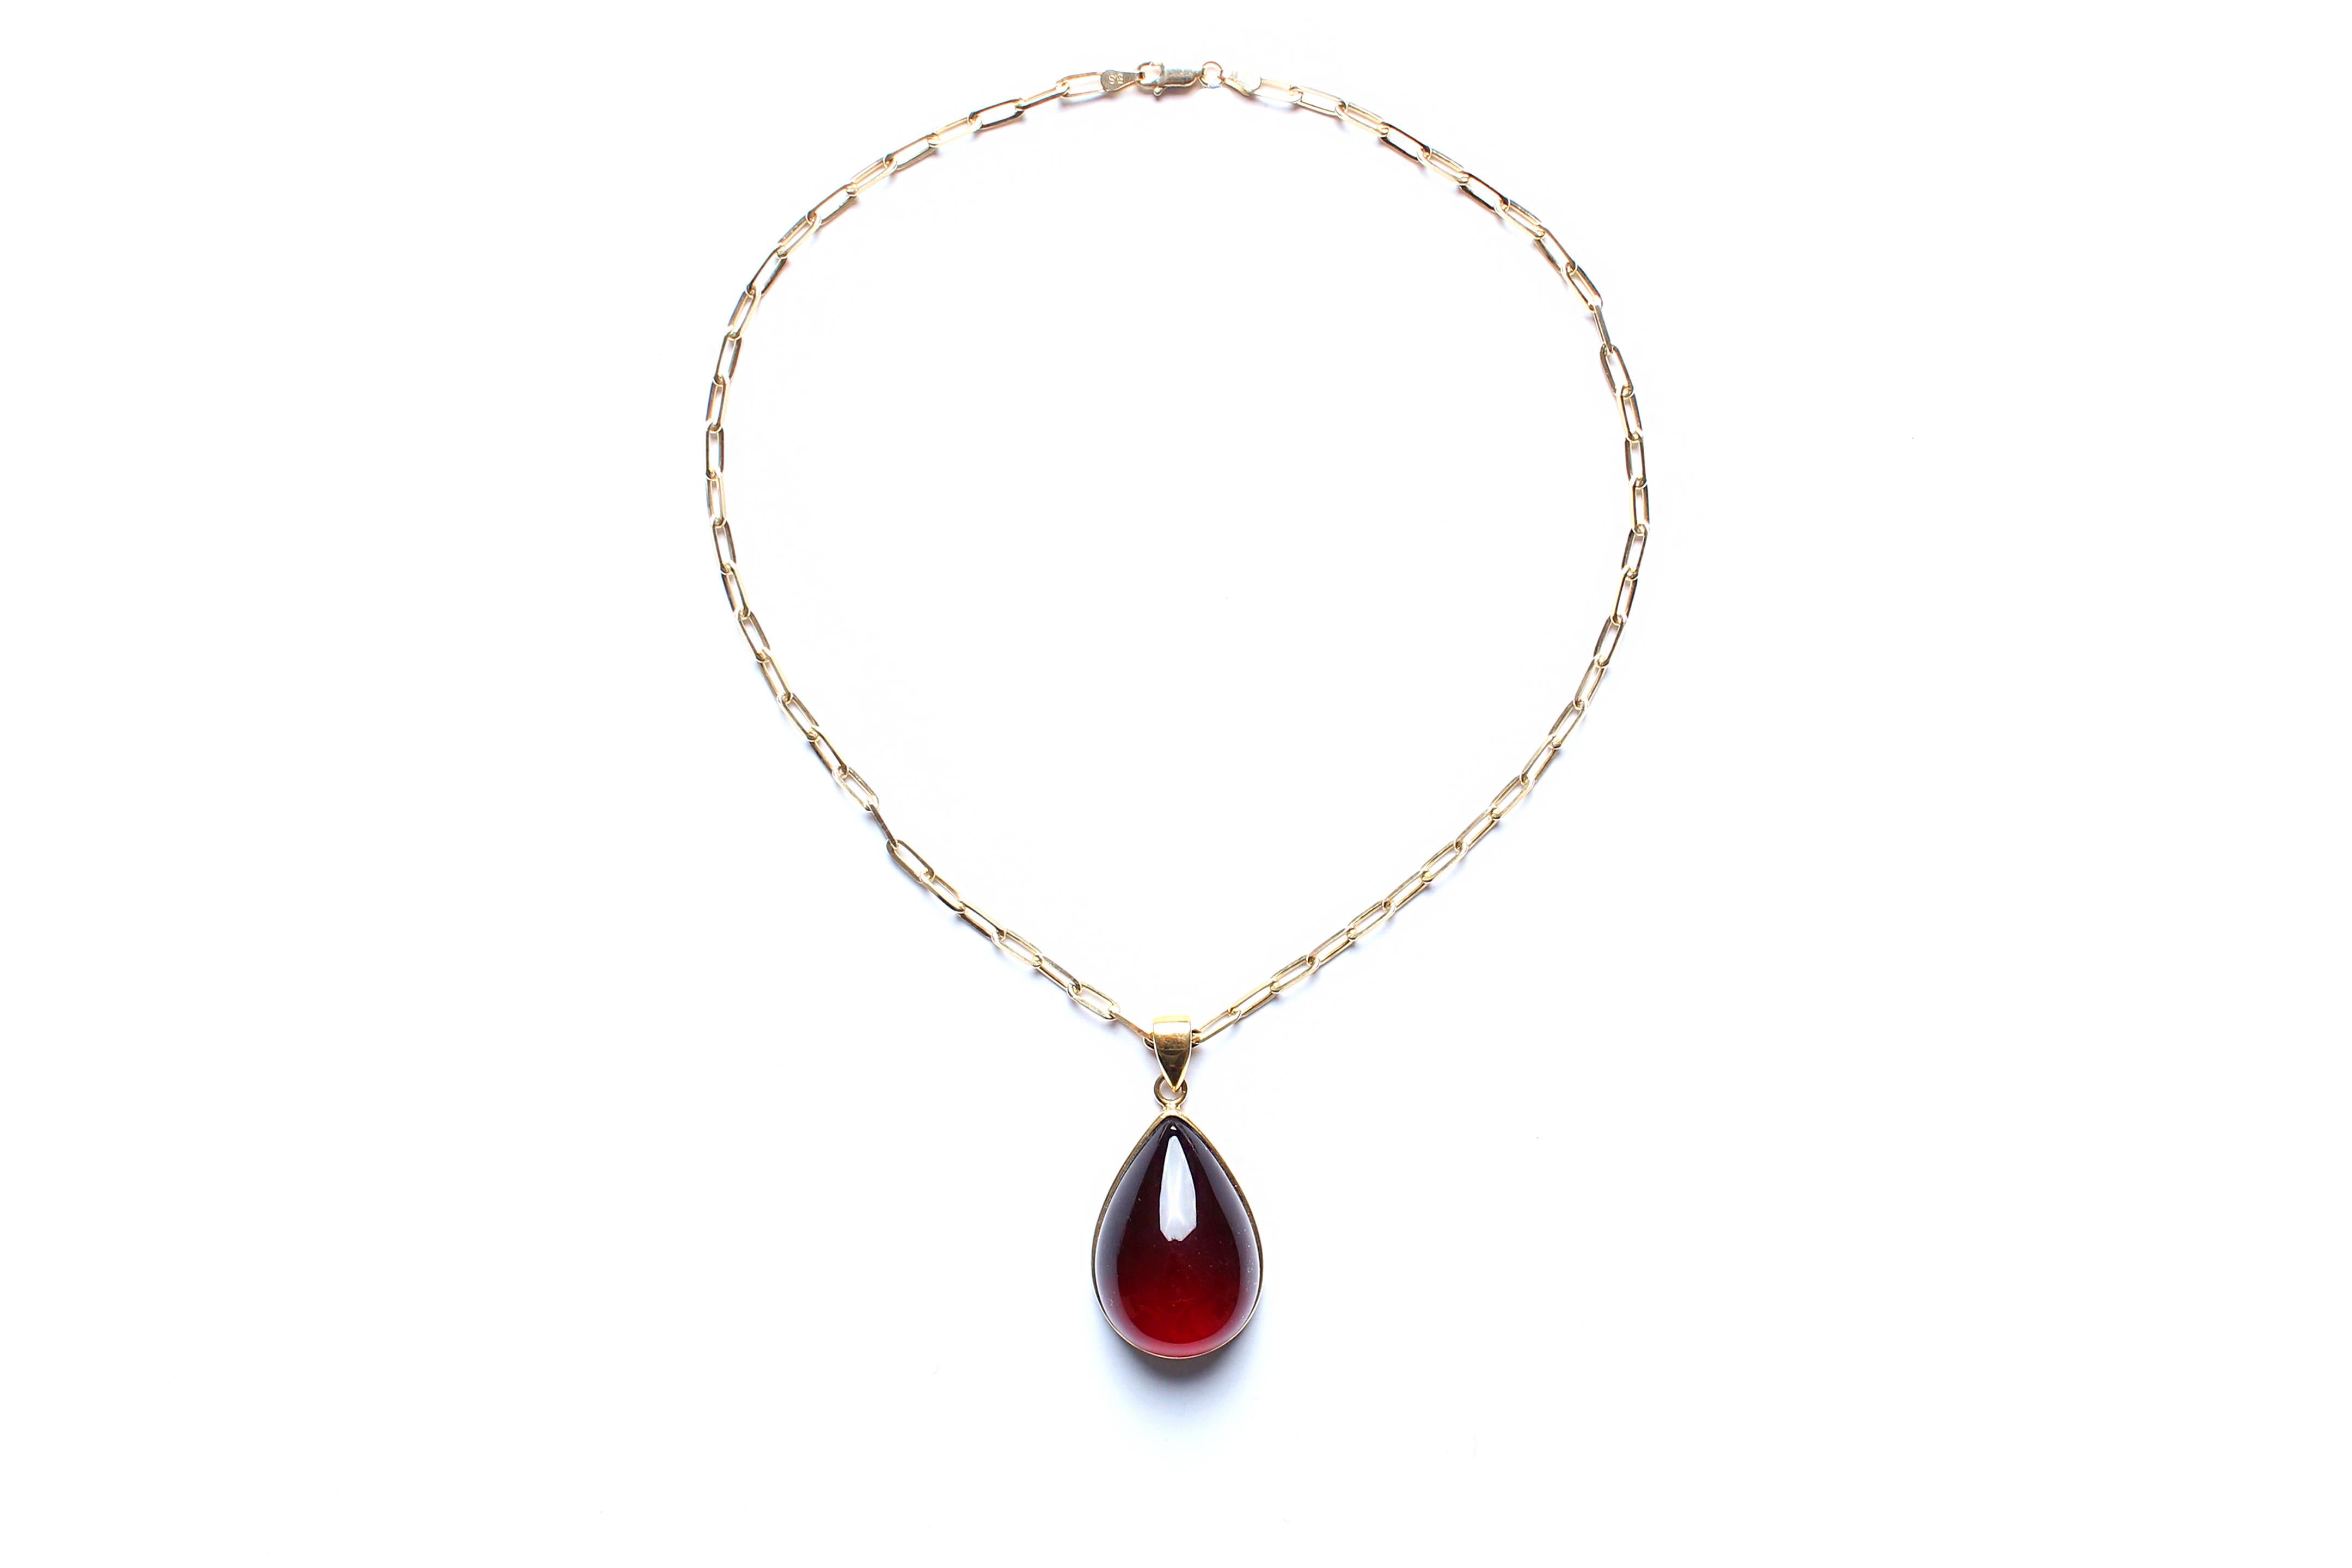 Mixed Cut Clarissa Bronfman 14k Gold Silver Paperclip Gold Chain with Cherry Amber Pendant For Sale